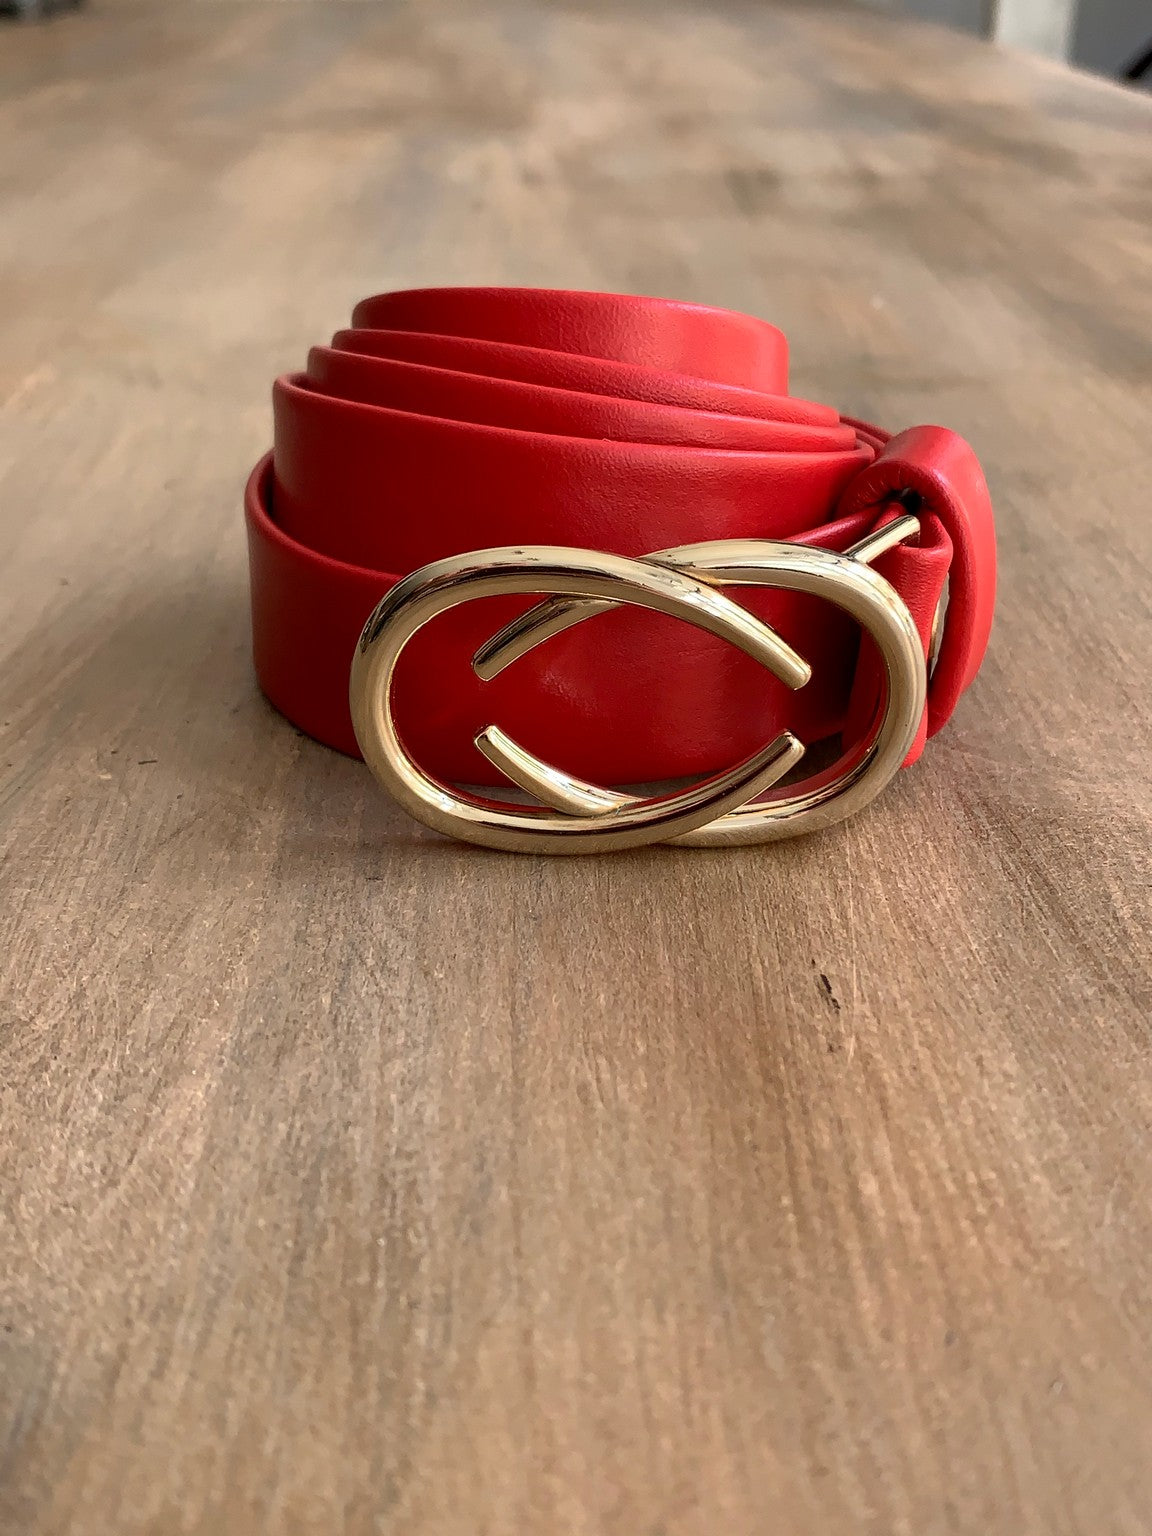 Women's thin belt handcrafted from red soft leather ideal for dresses WB101293/25G